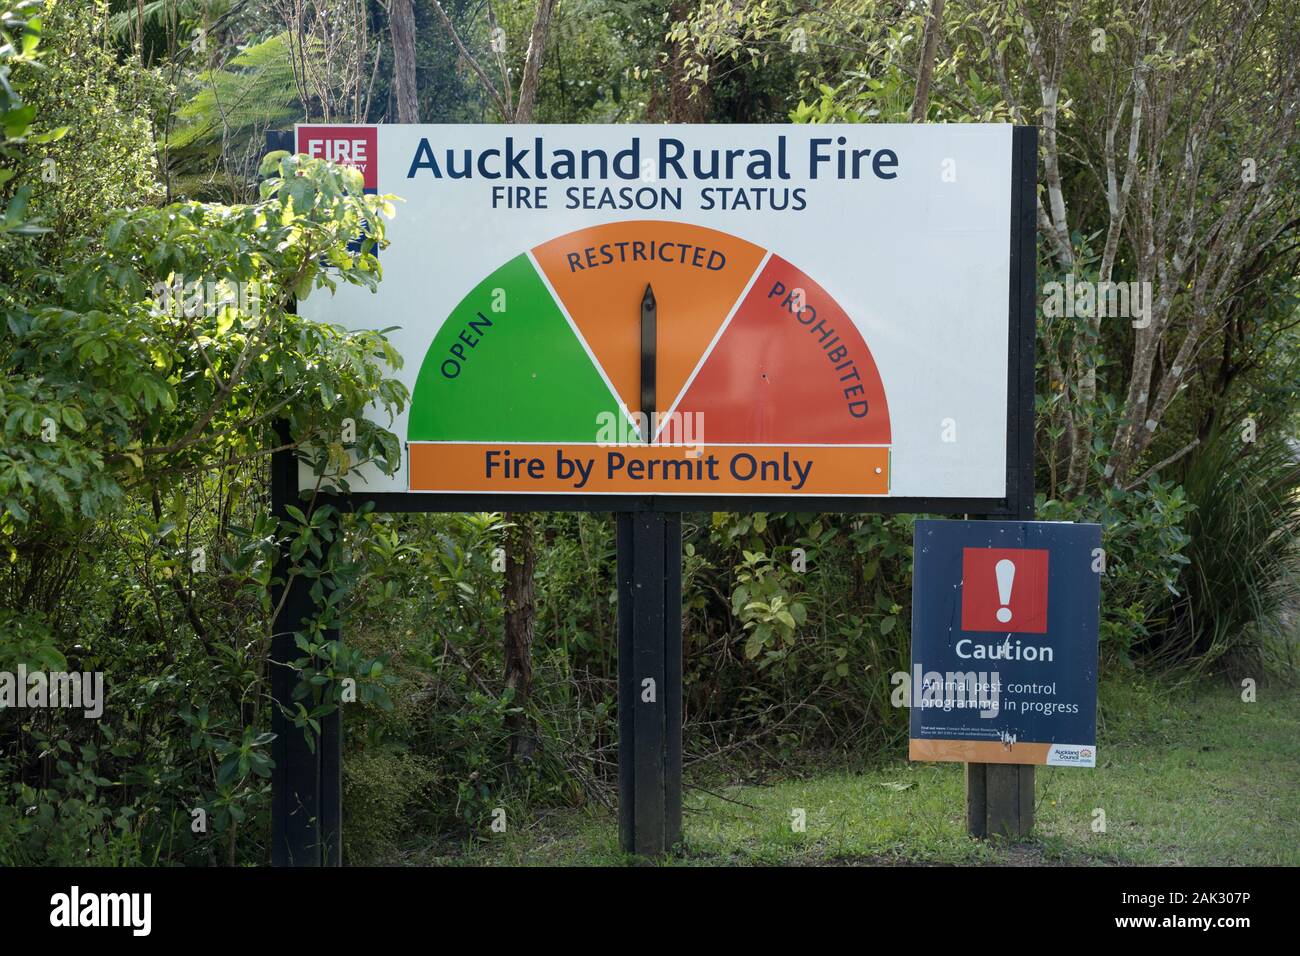 Auckland Rural Fire season status warning sign native bush roadside, permit only restricted, Piha, Waitakere Ranges, West Coast, pest control caution Stock Photo